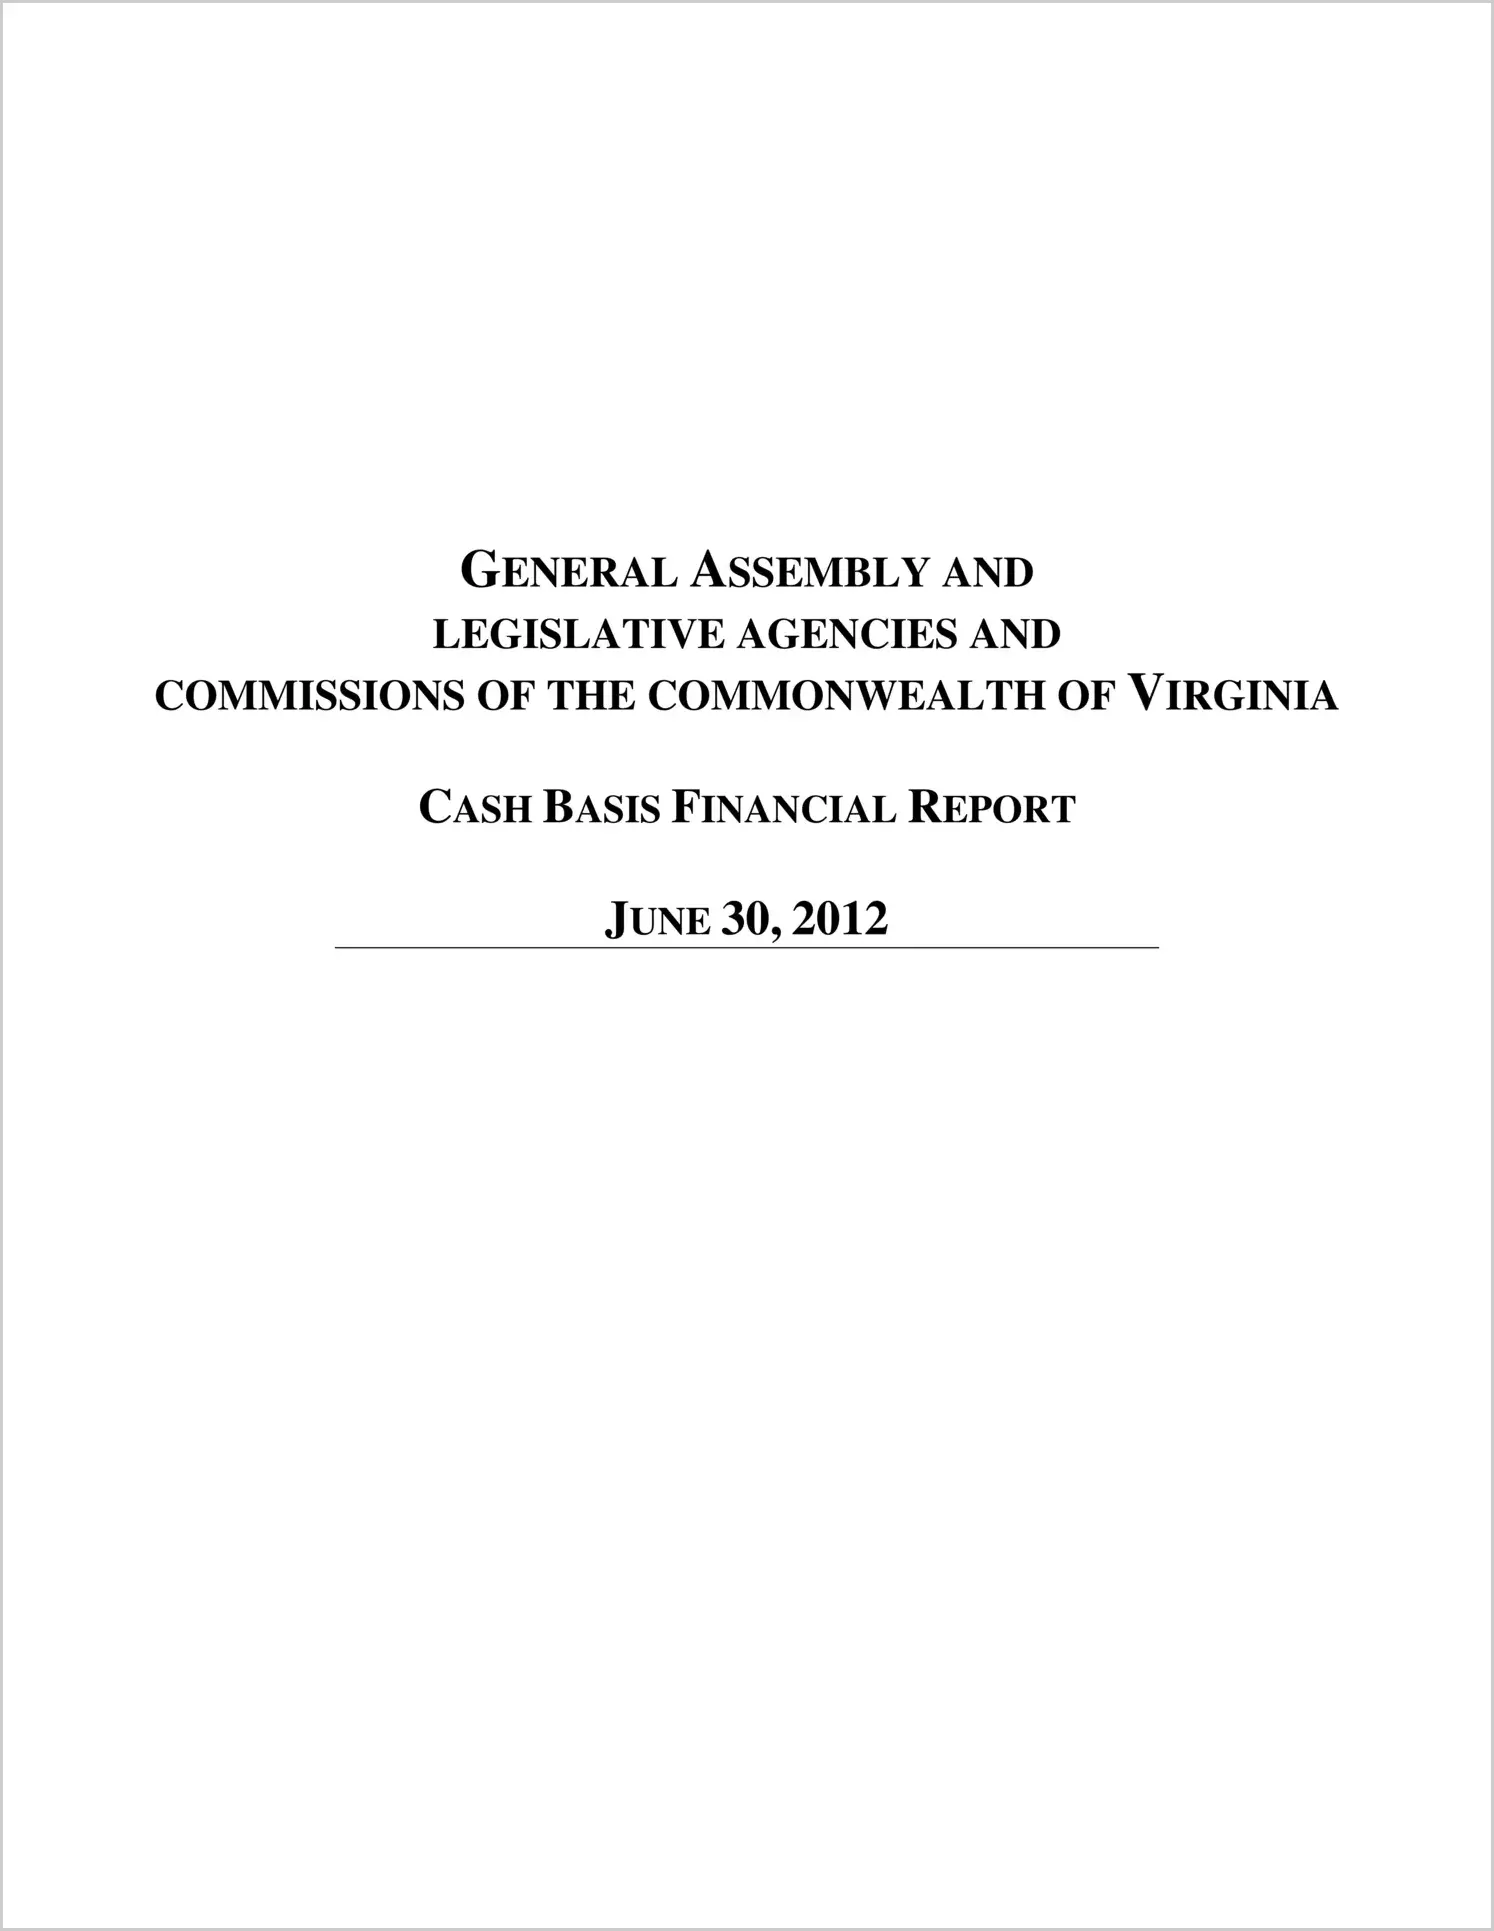 General Assembly and Legislative Agencies and Commissions of the Commonwealth of Virginia Financial Report For The Fiscal Year ended June 30, 2012